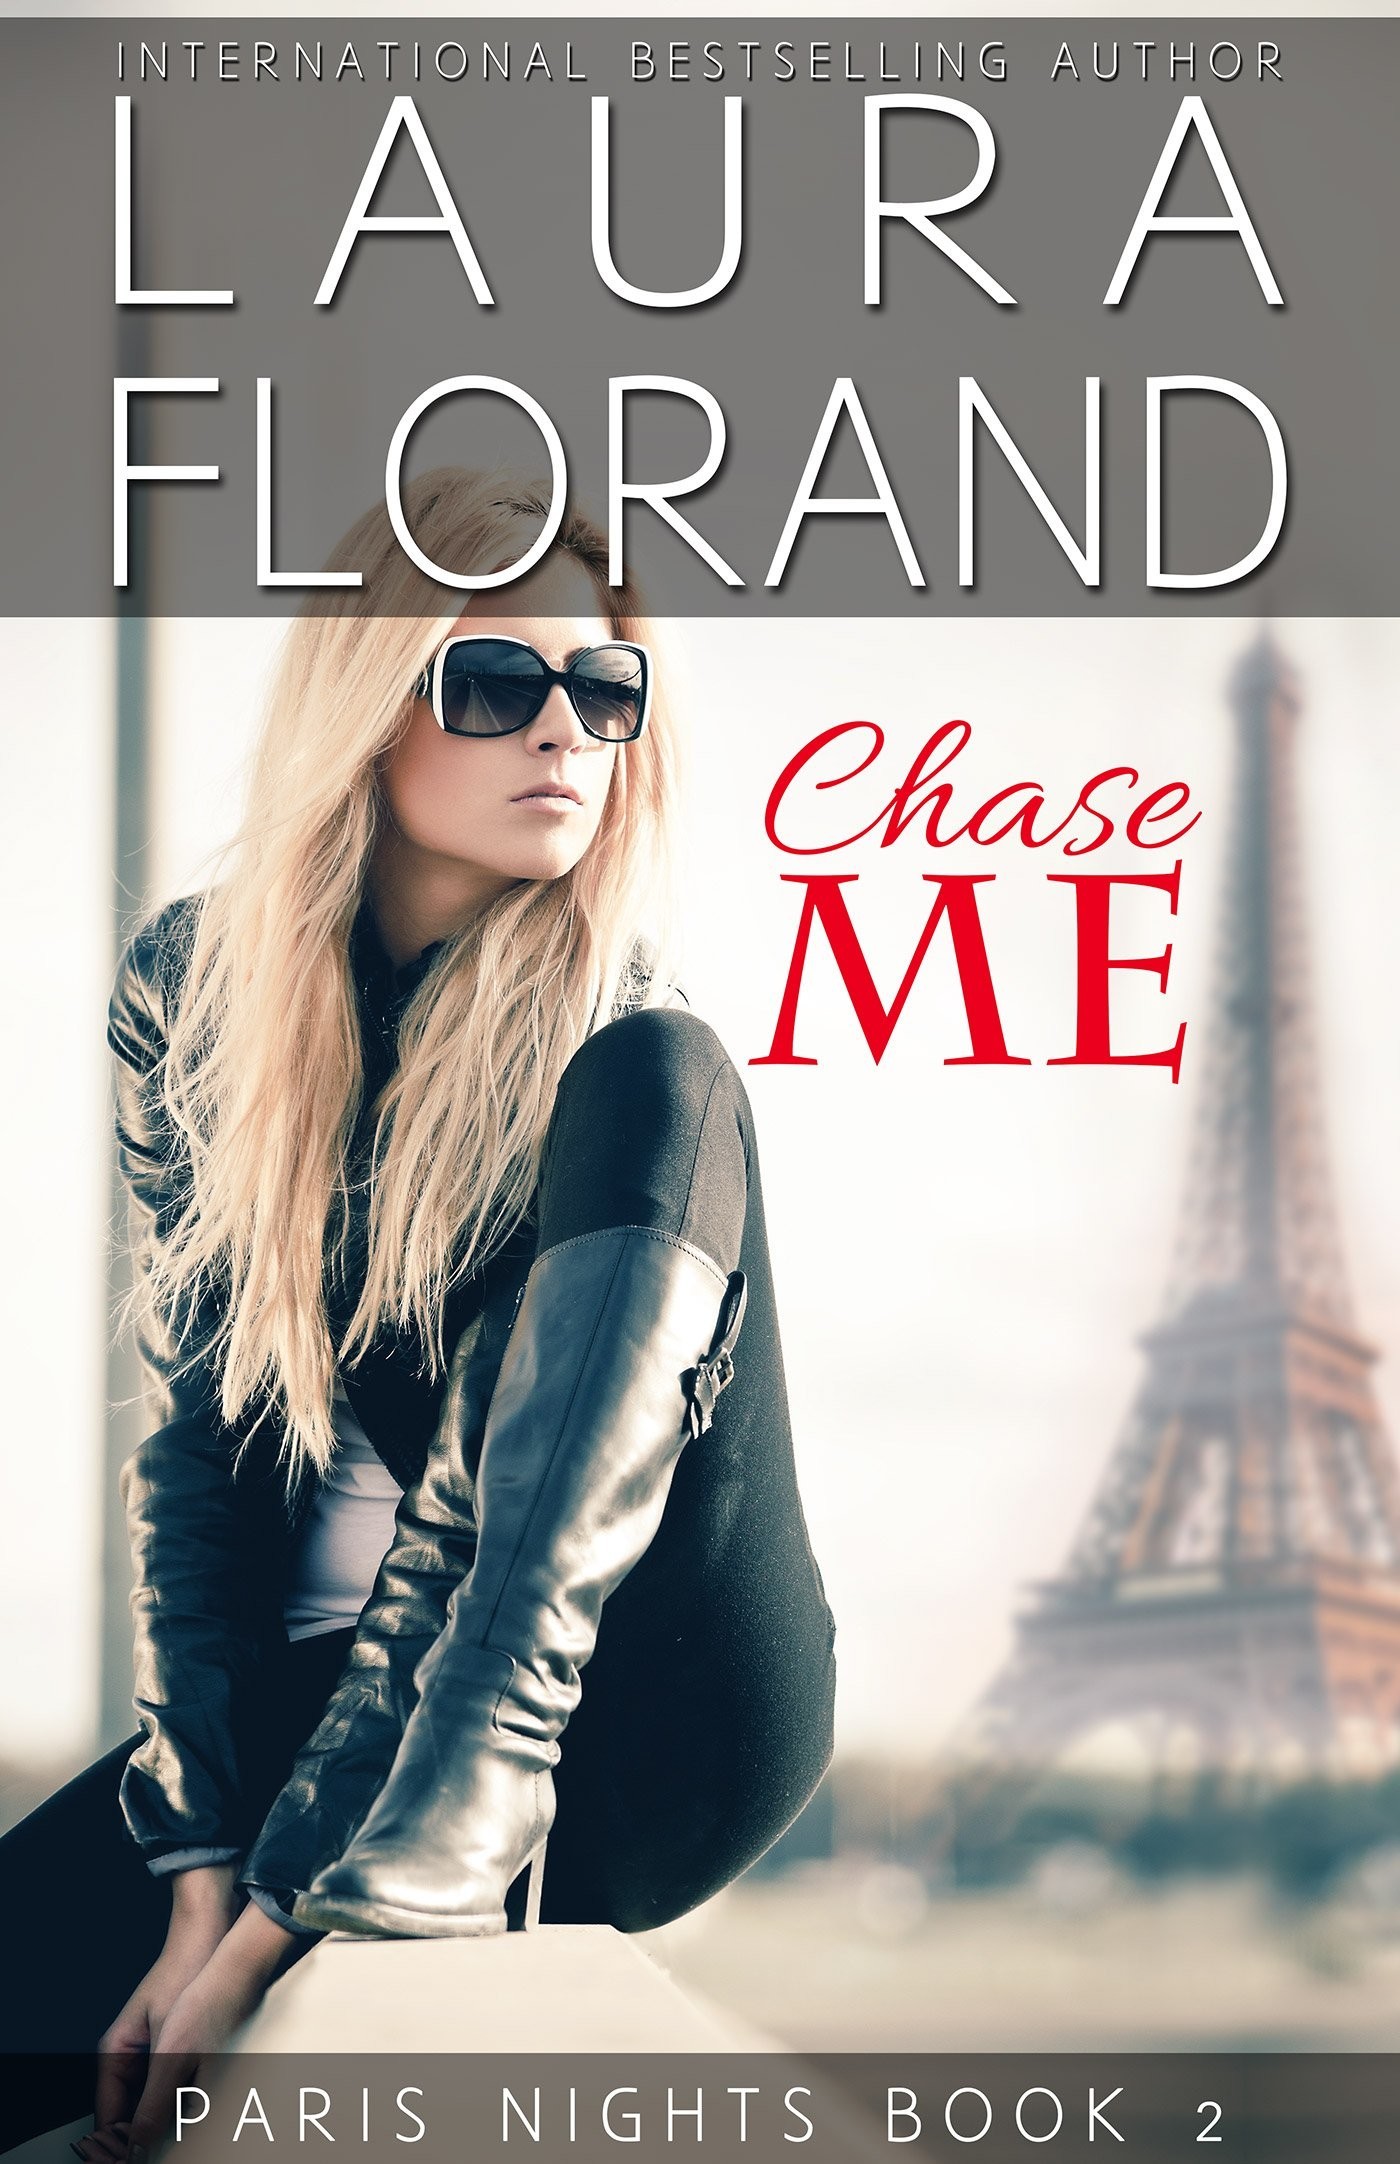 Chase Me (Paris Nights Book 2) by Laura Florand